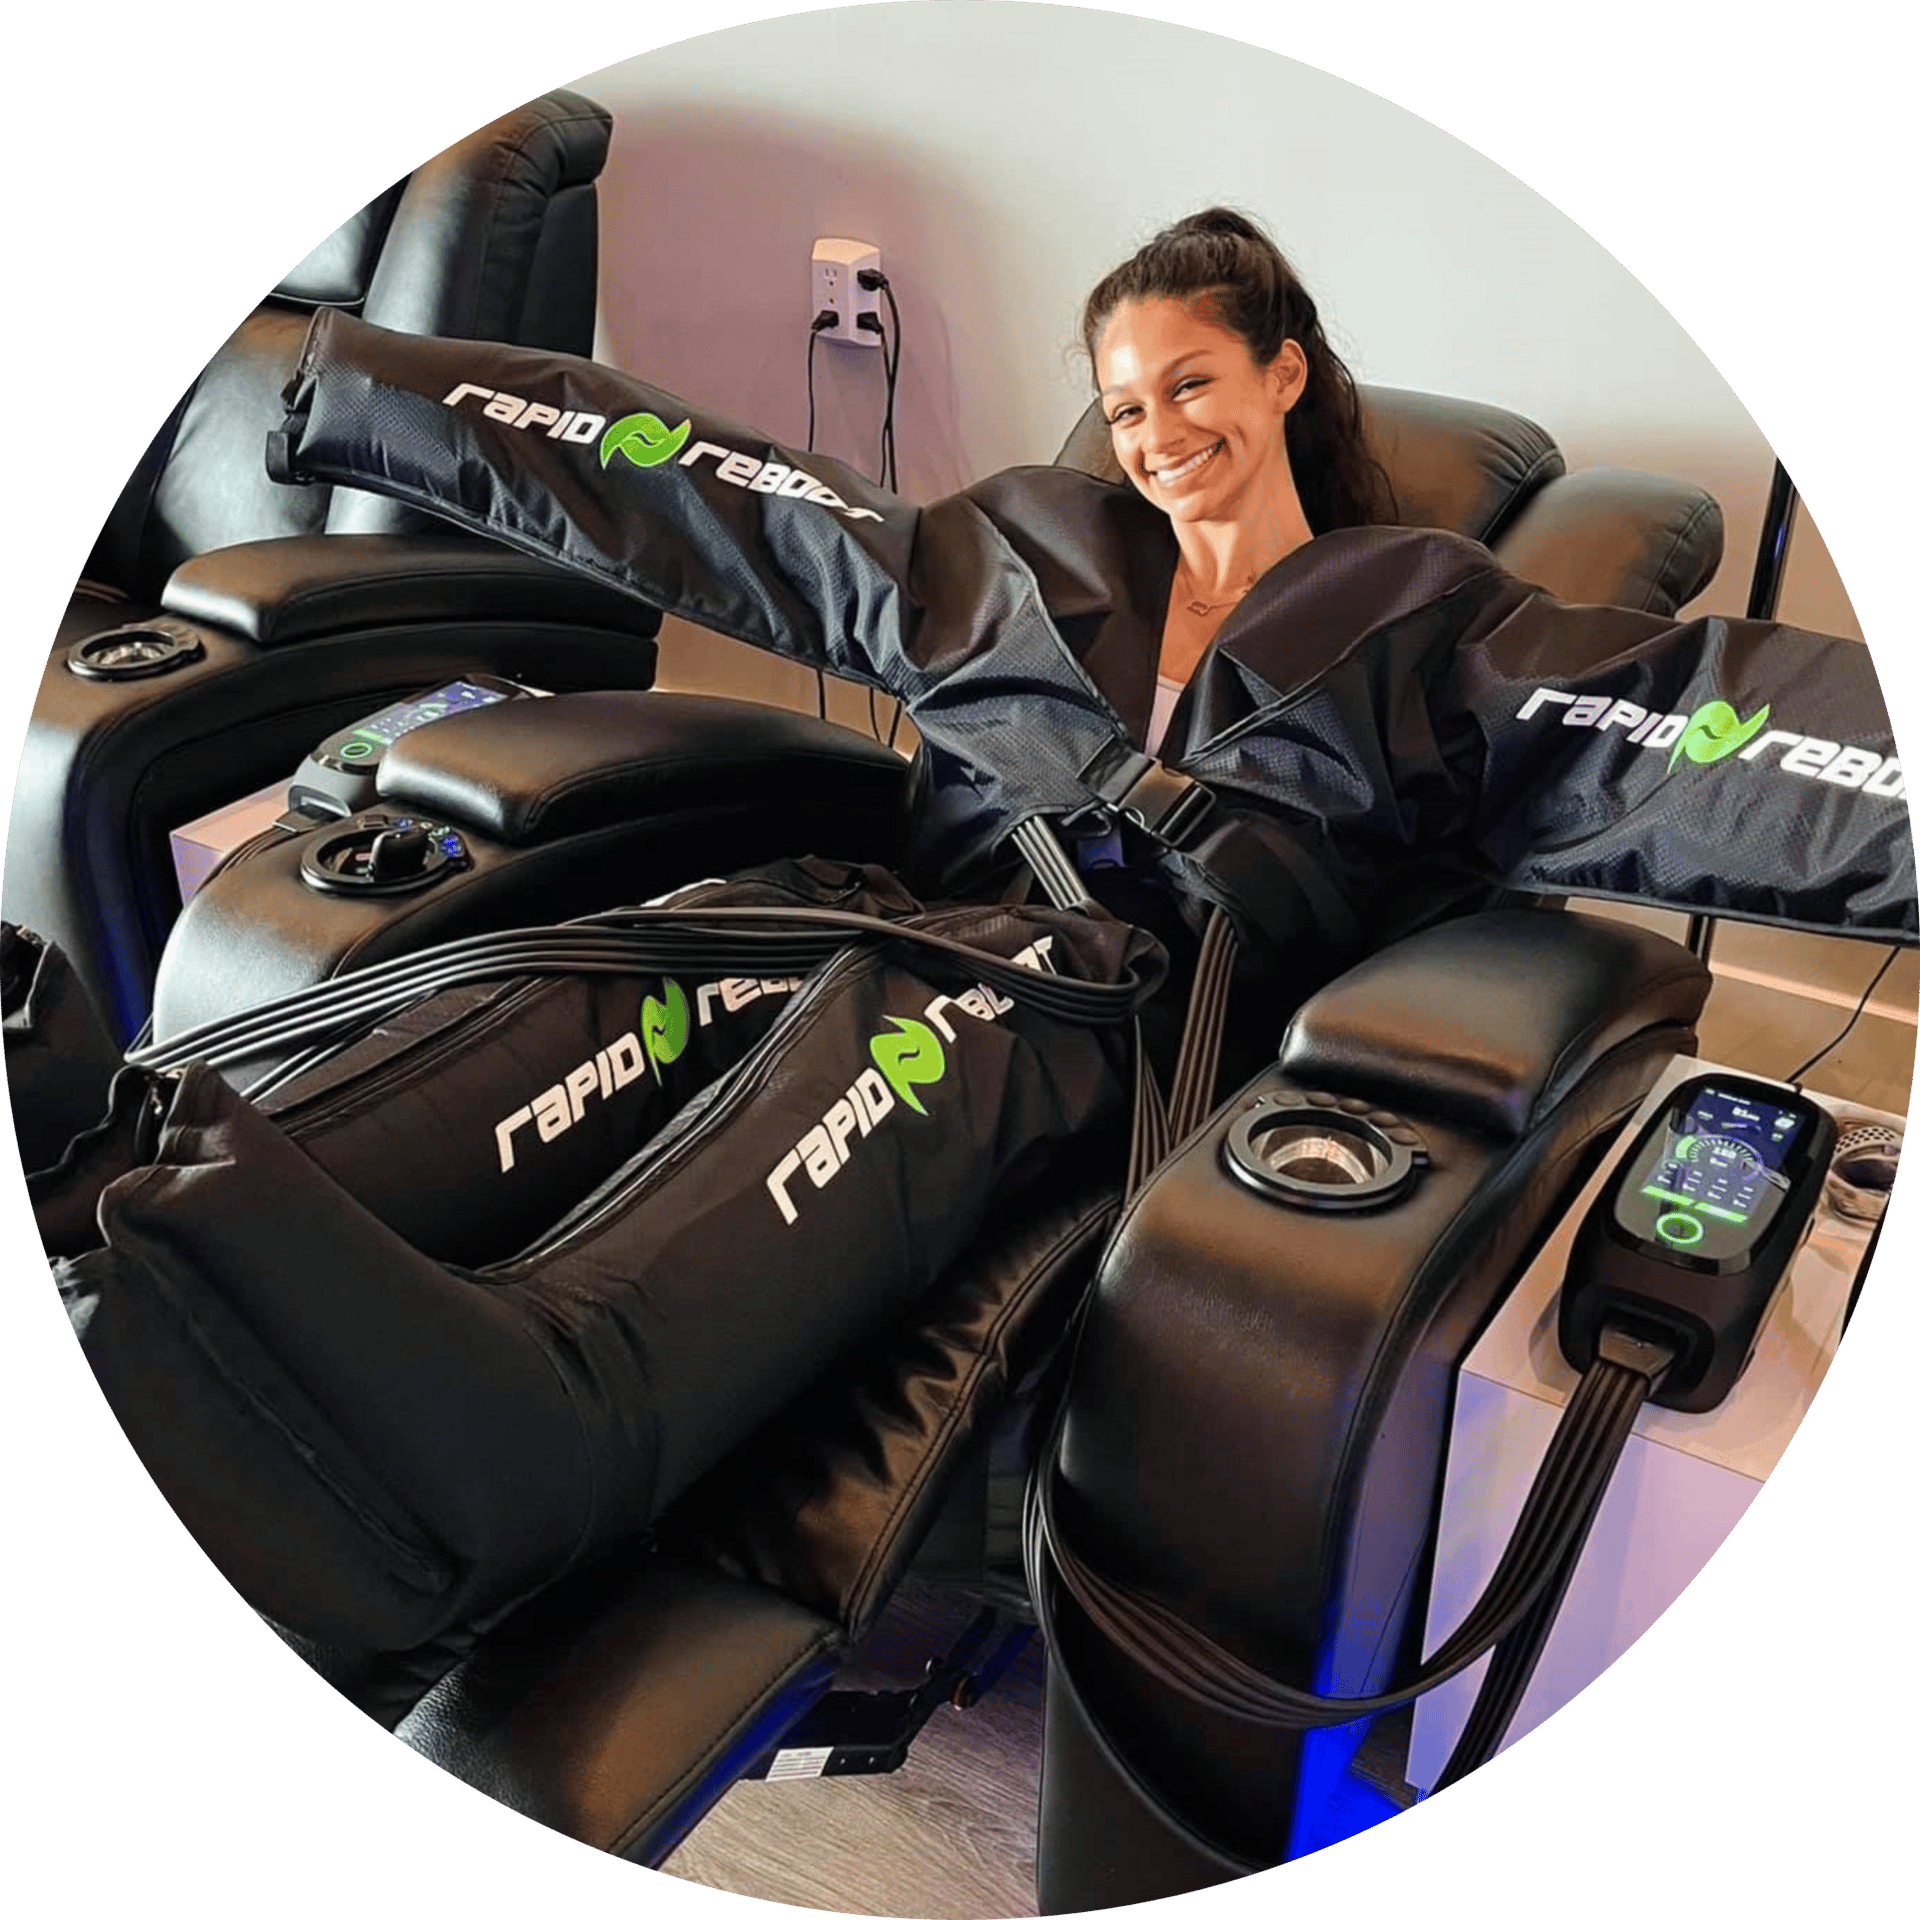 Compression Therapy – Cryo